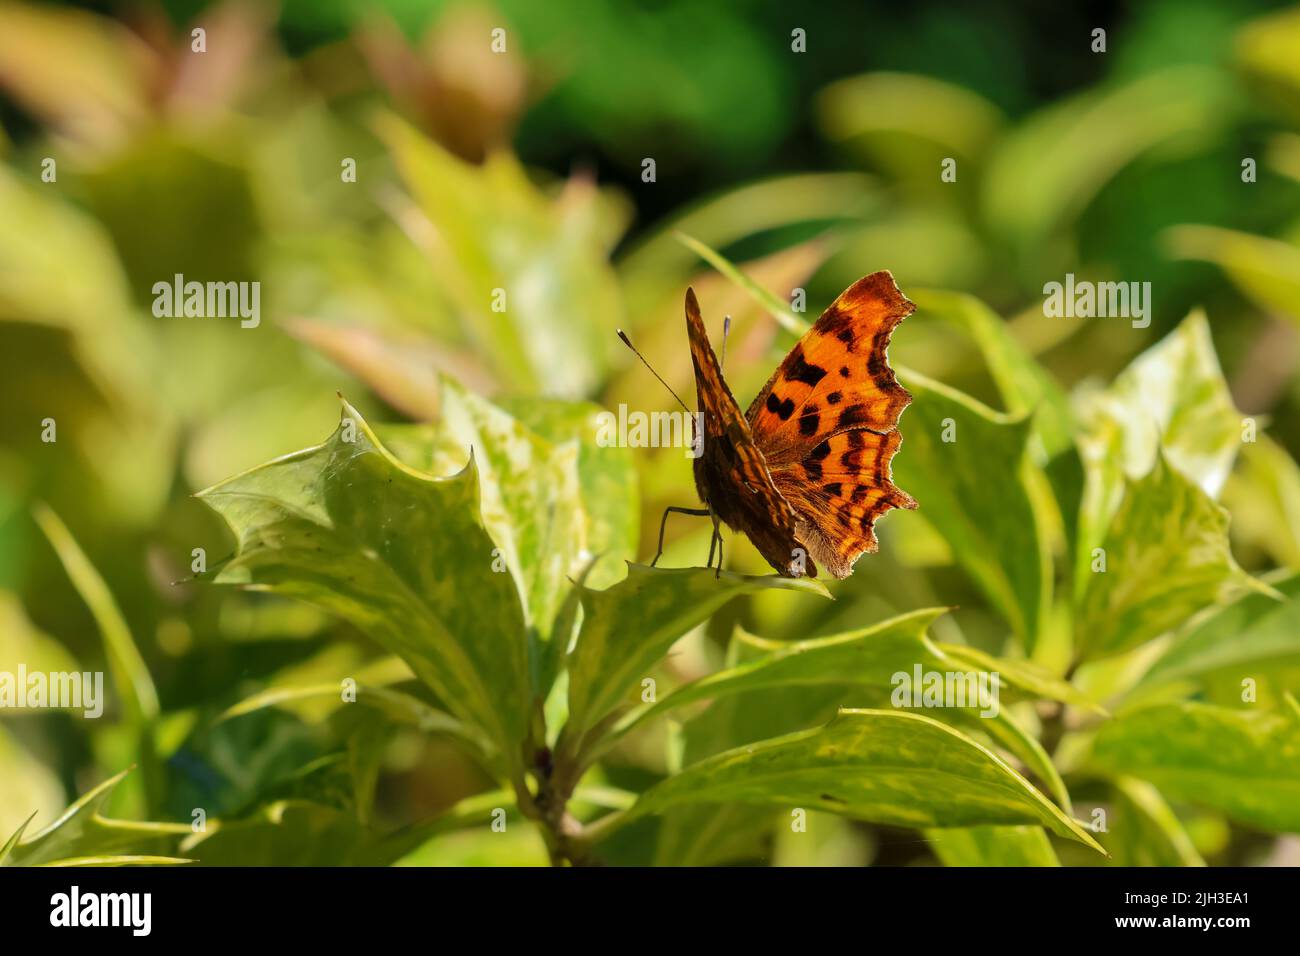 The Comma butterfly 'Polygonia c-album', bright orange with scallop edge wings, on summer holly leaves. Dublin, Ireland Stock Photo